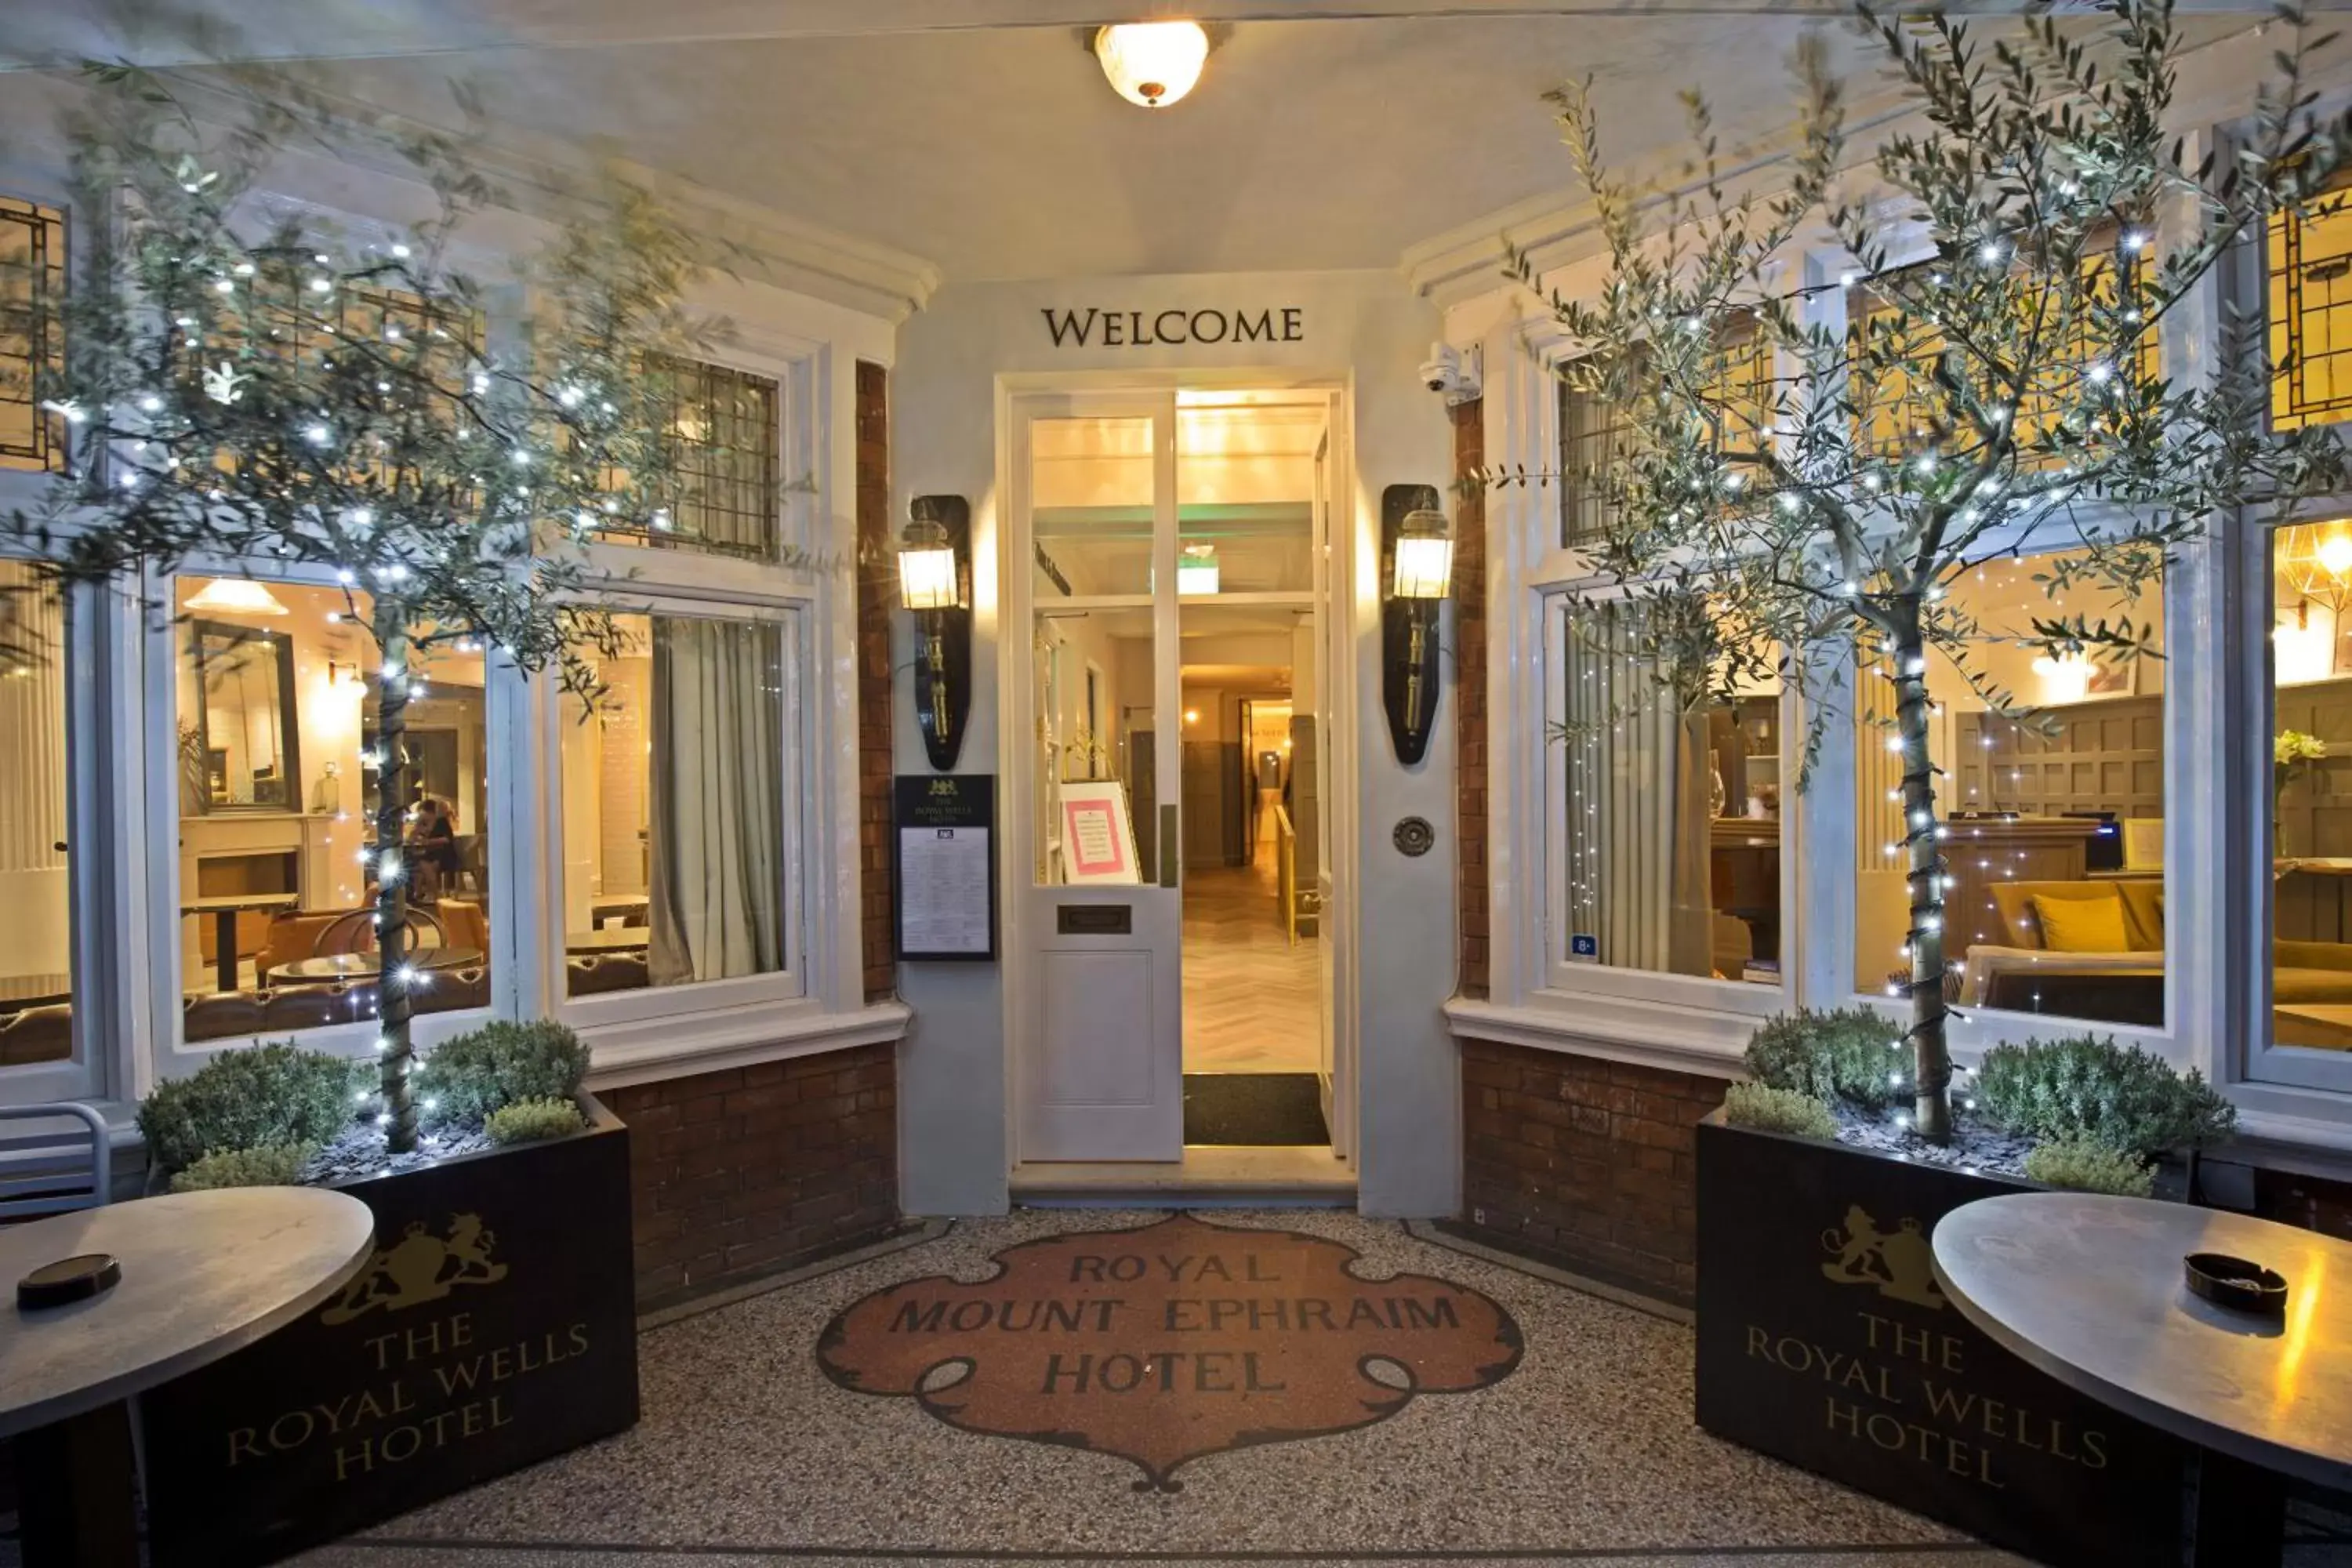 Facade/entrance in The Royal Wells Hotel